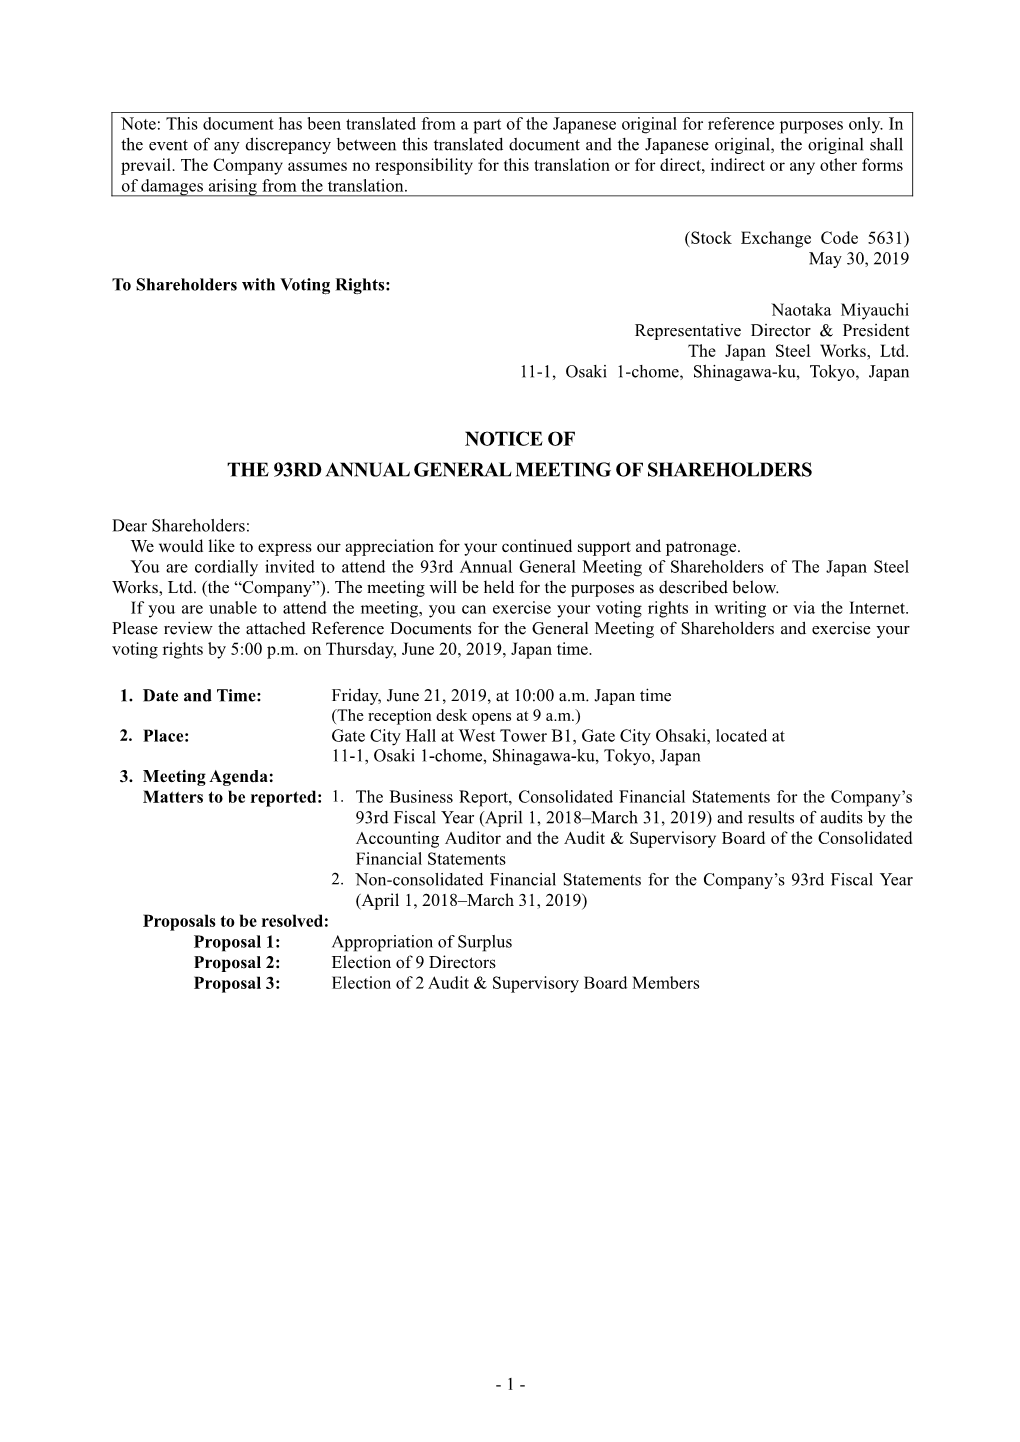 Notice of the 93Rd Annual General Meeting of Shareholders